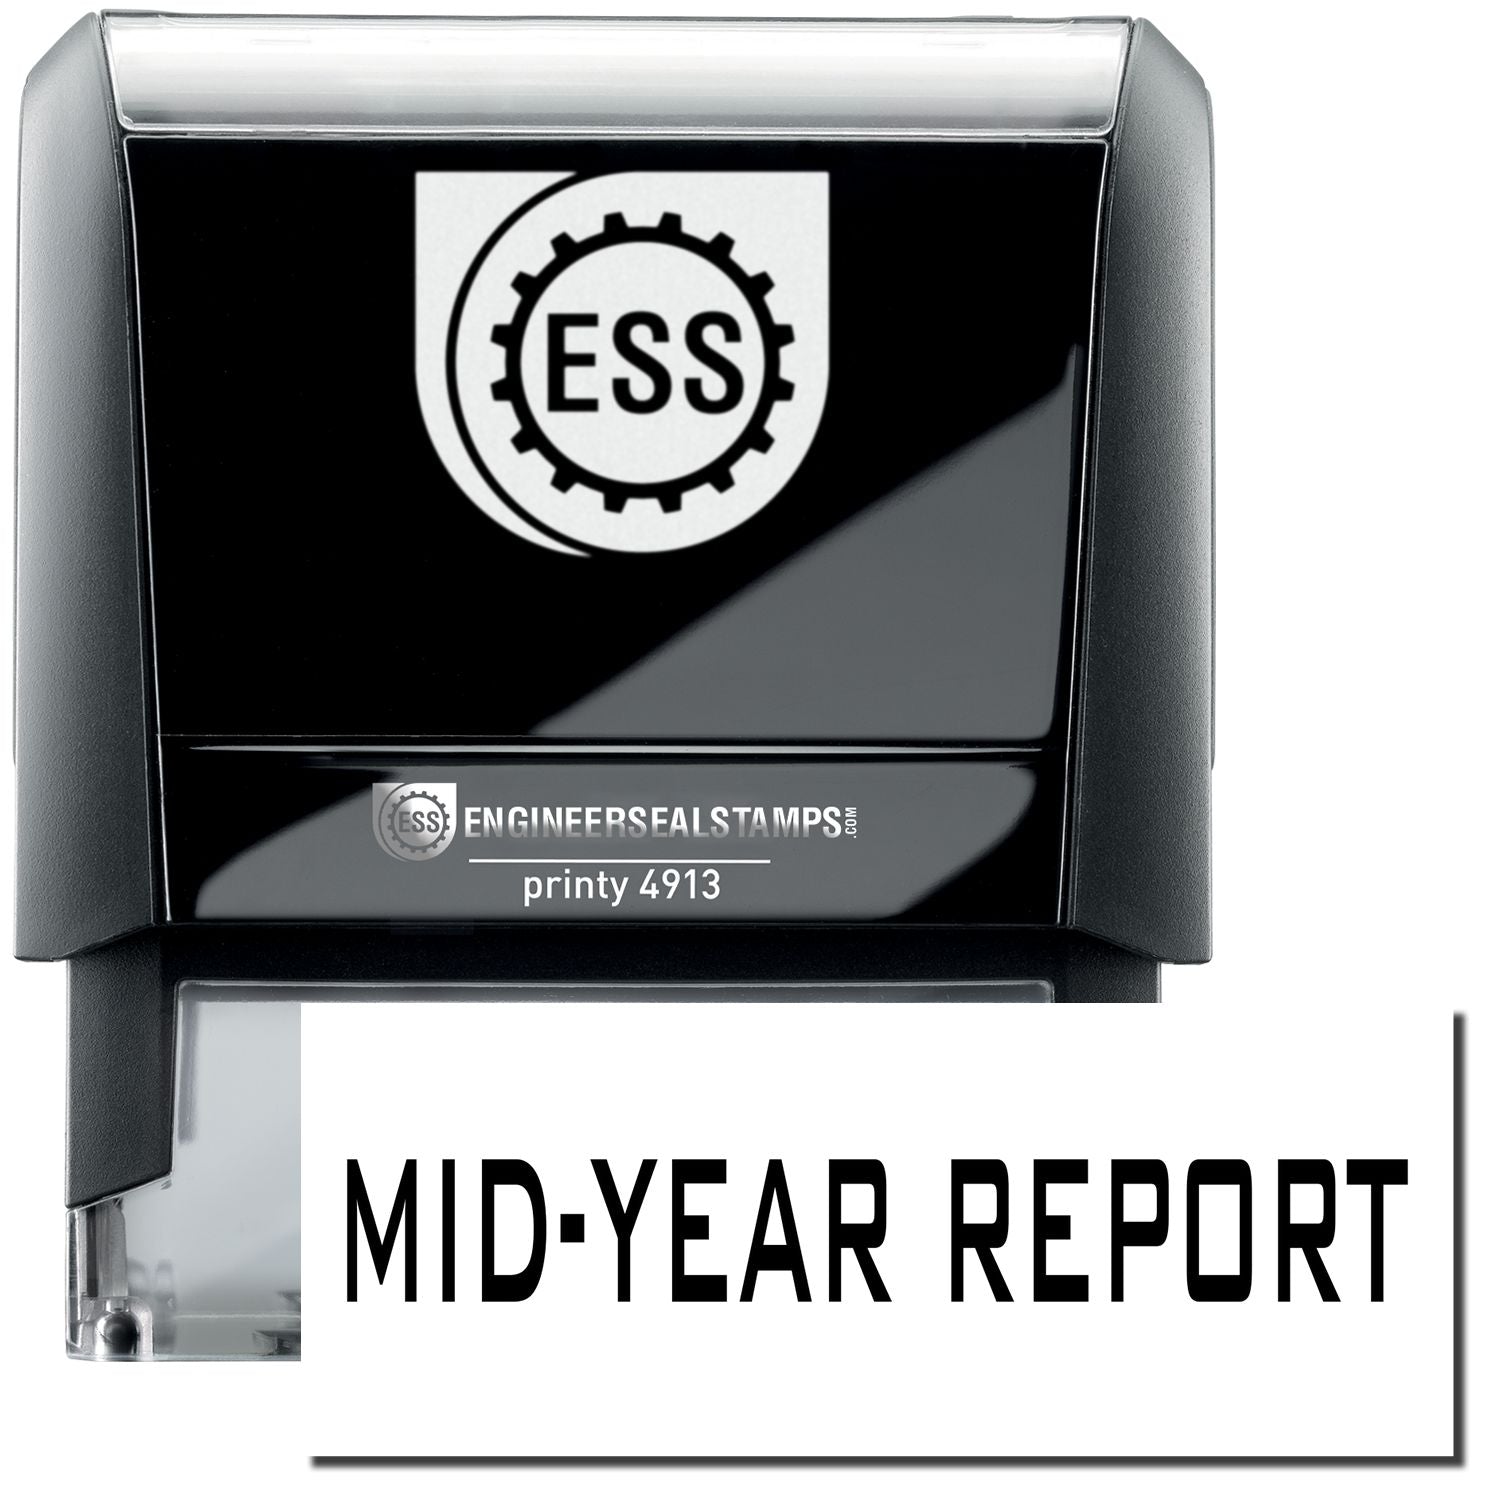 A self-inking stamp with a stamped image showing how the text "MID-YEAR REPORT" in a large bold font is displayed by it.